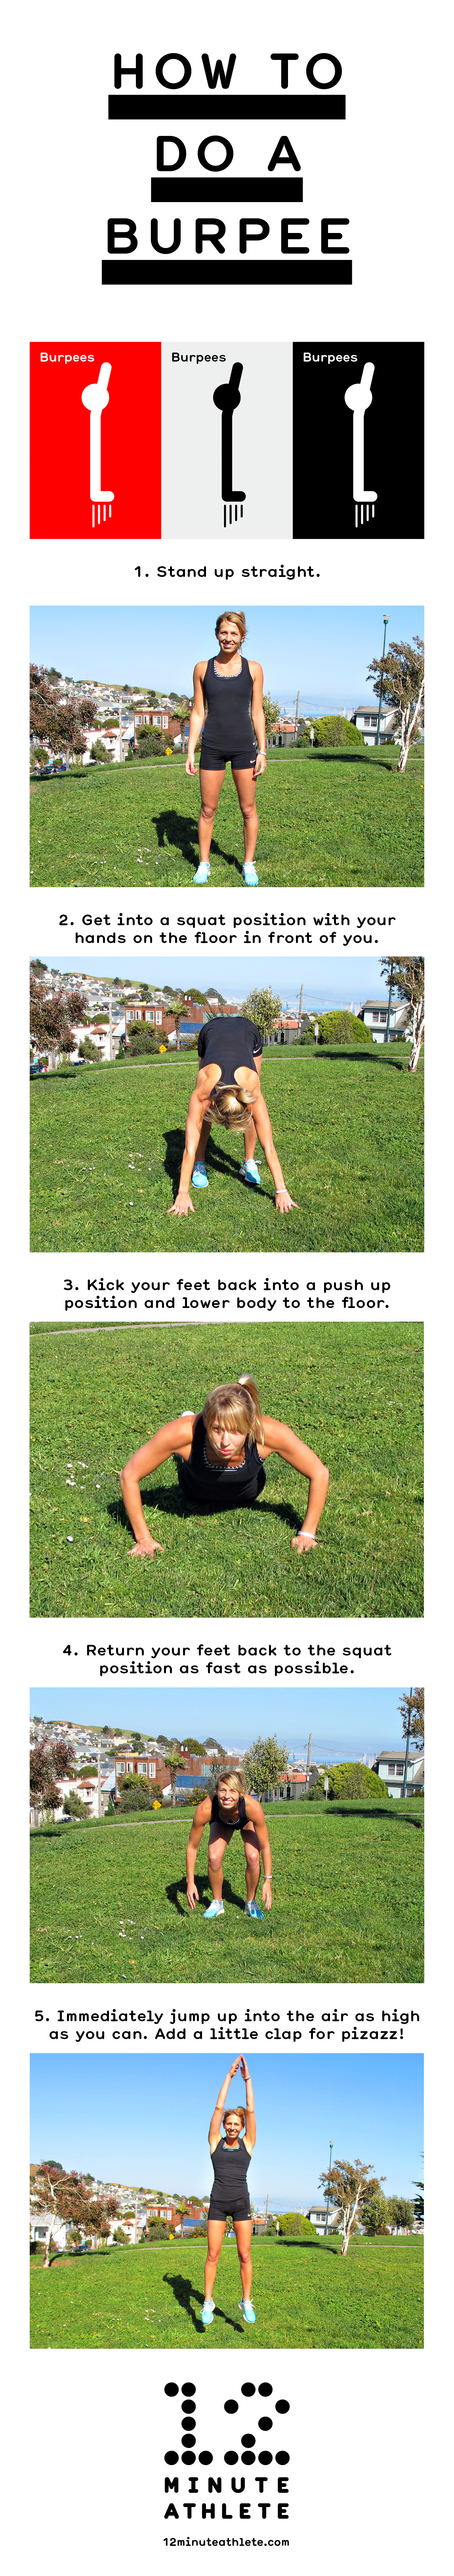 how to do a burpee infographic